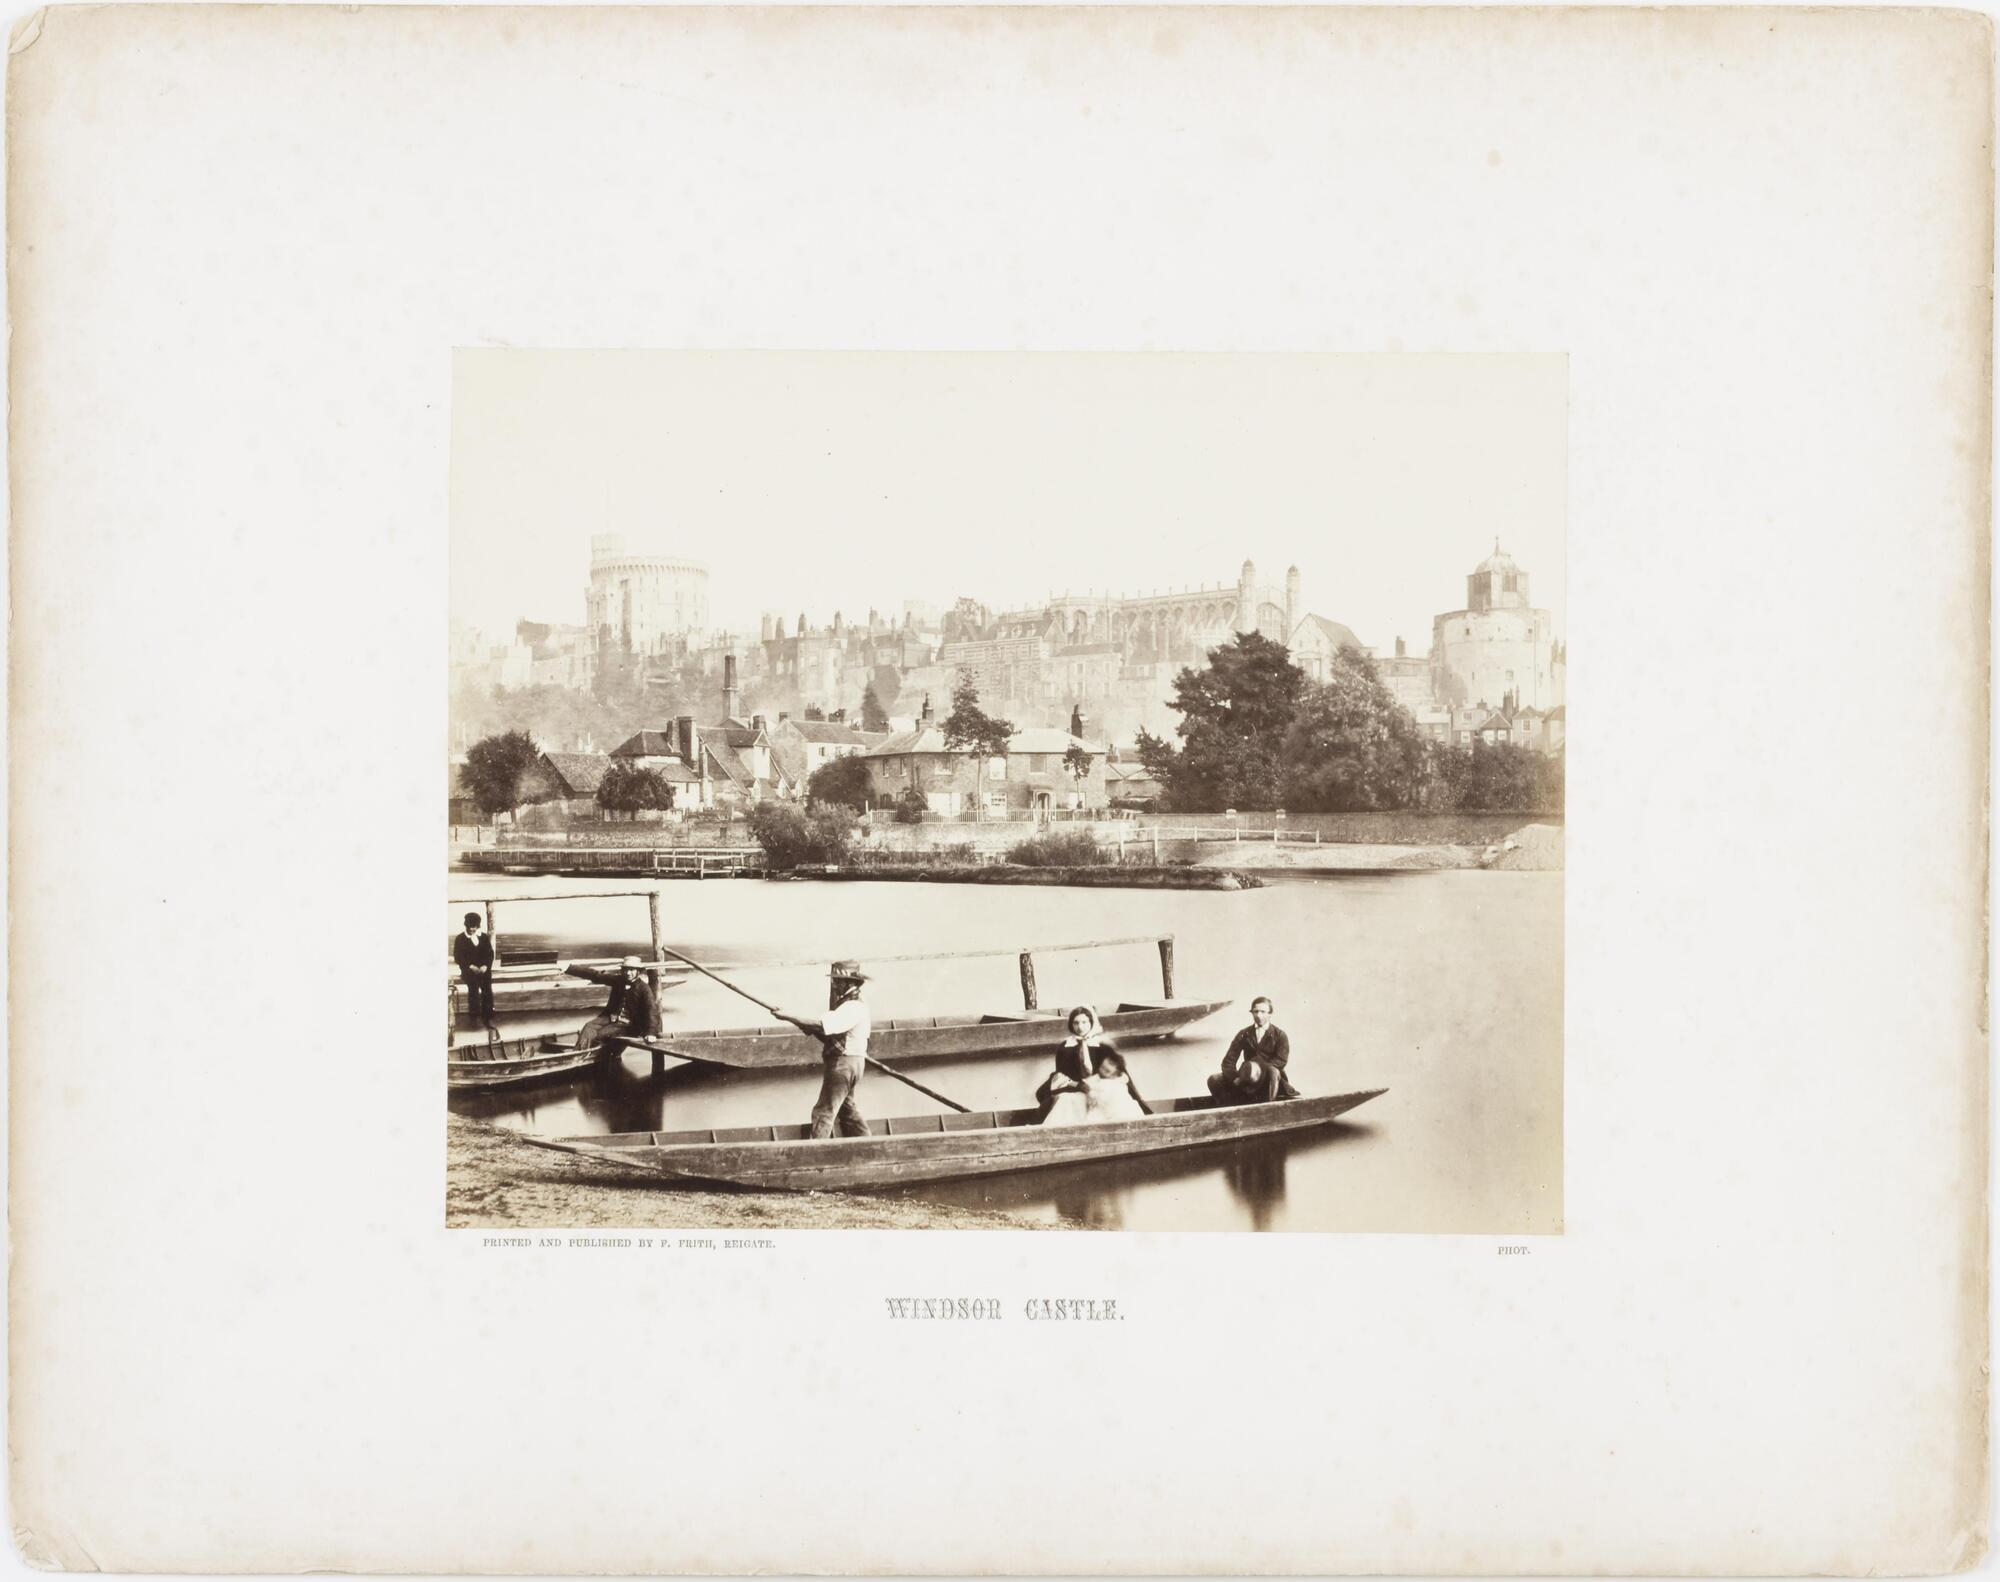 View of several row boats with passengers moored on the edge of a body water across from a town. 